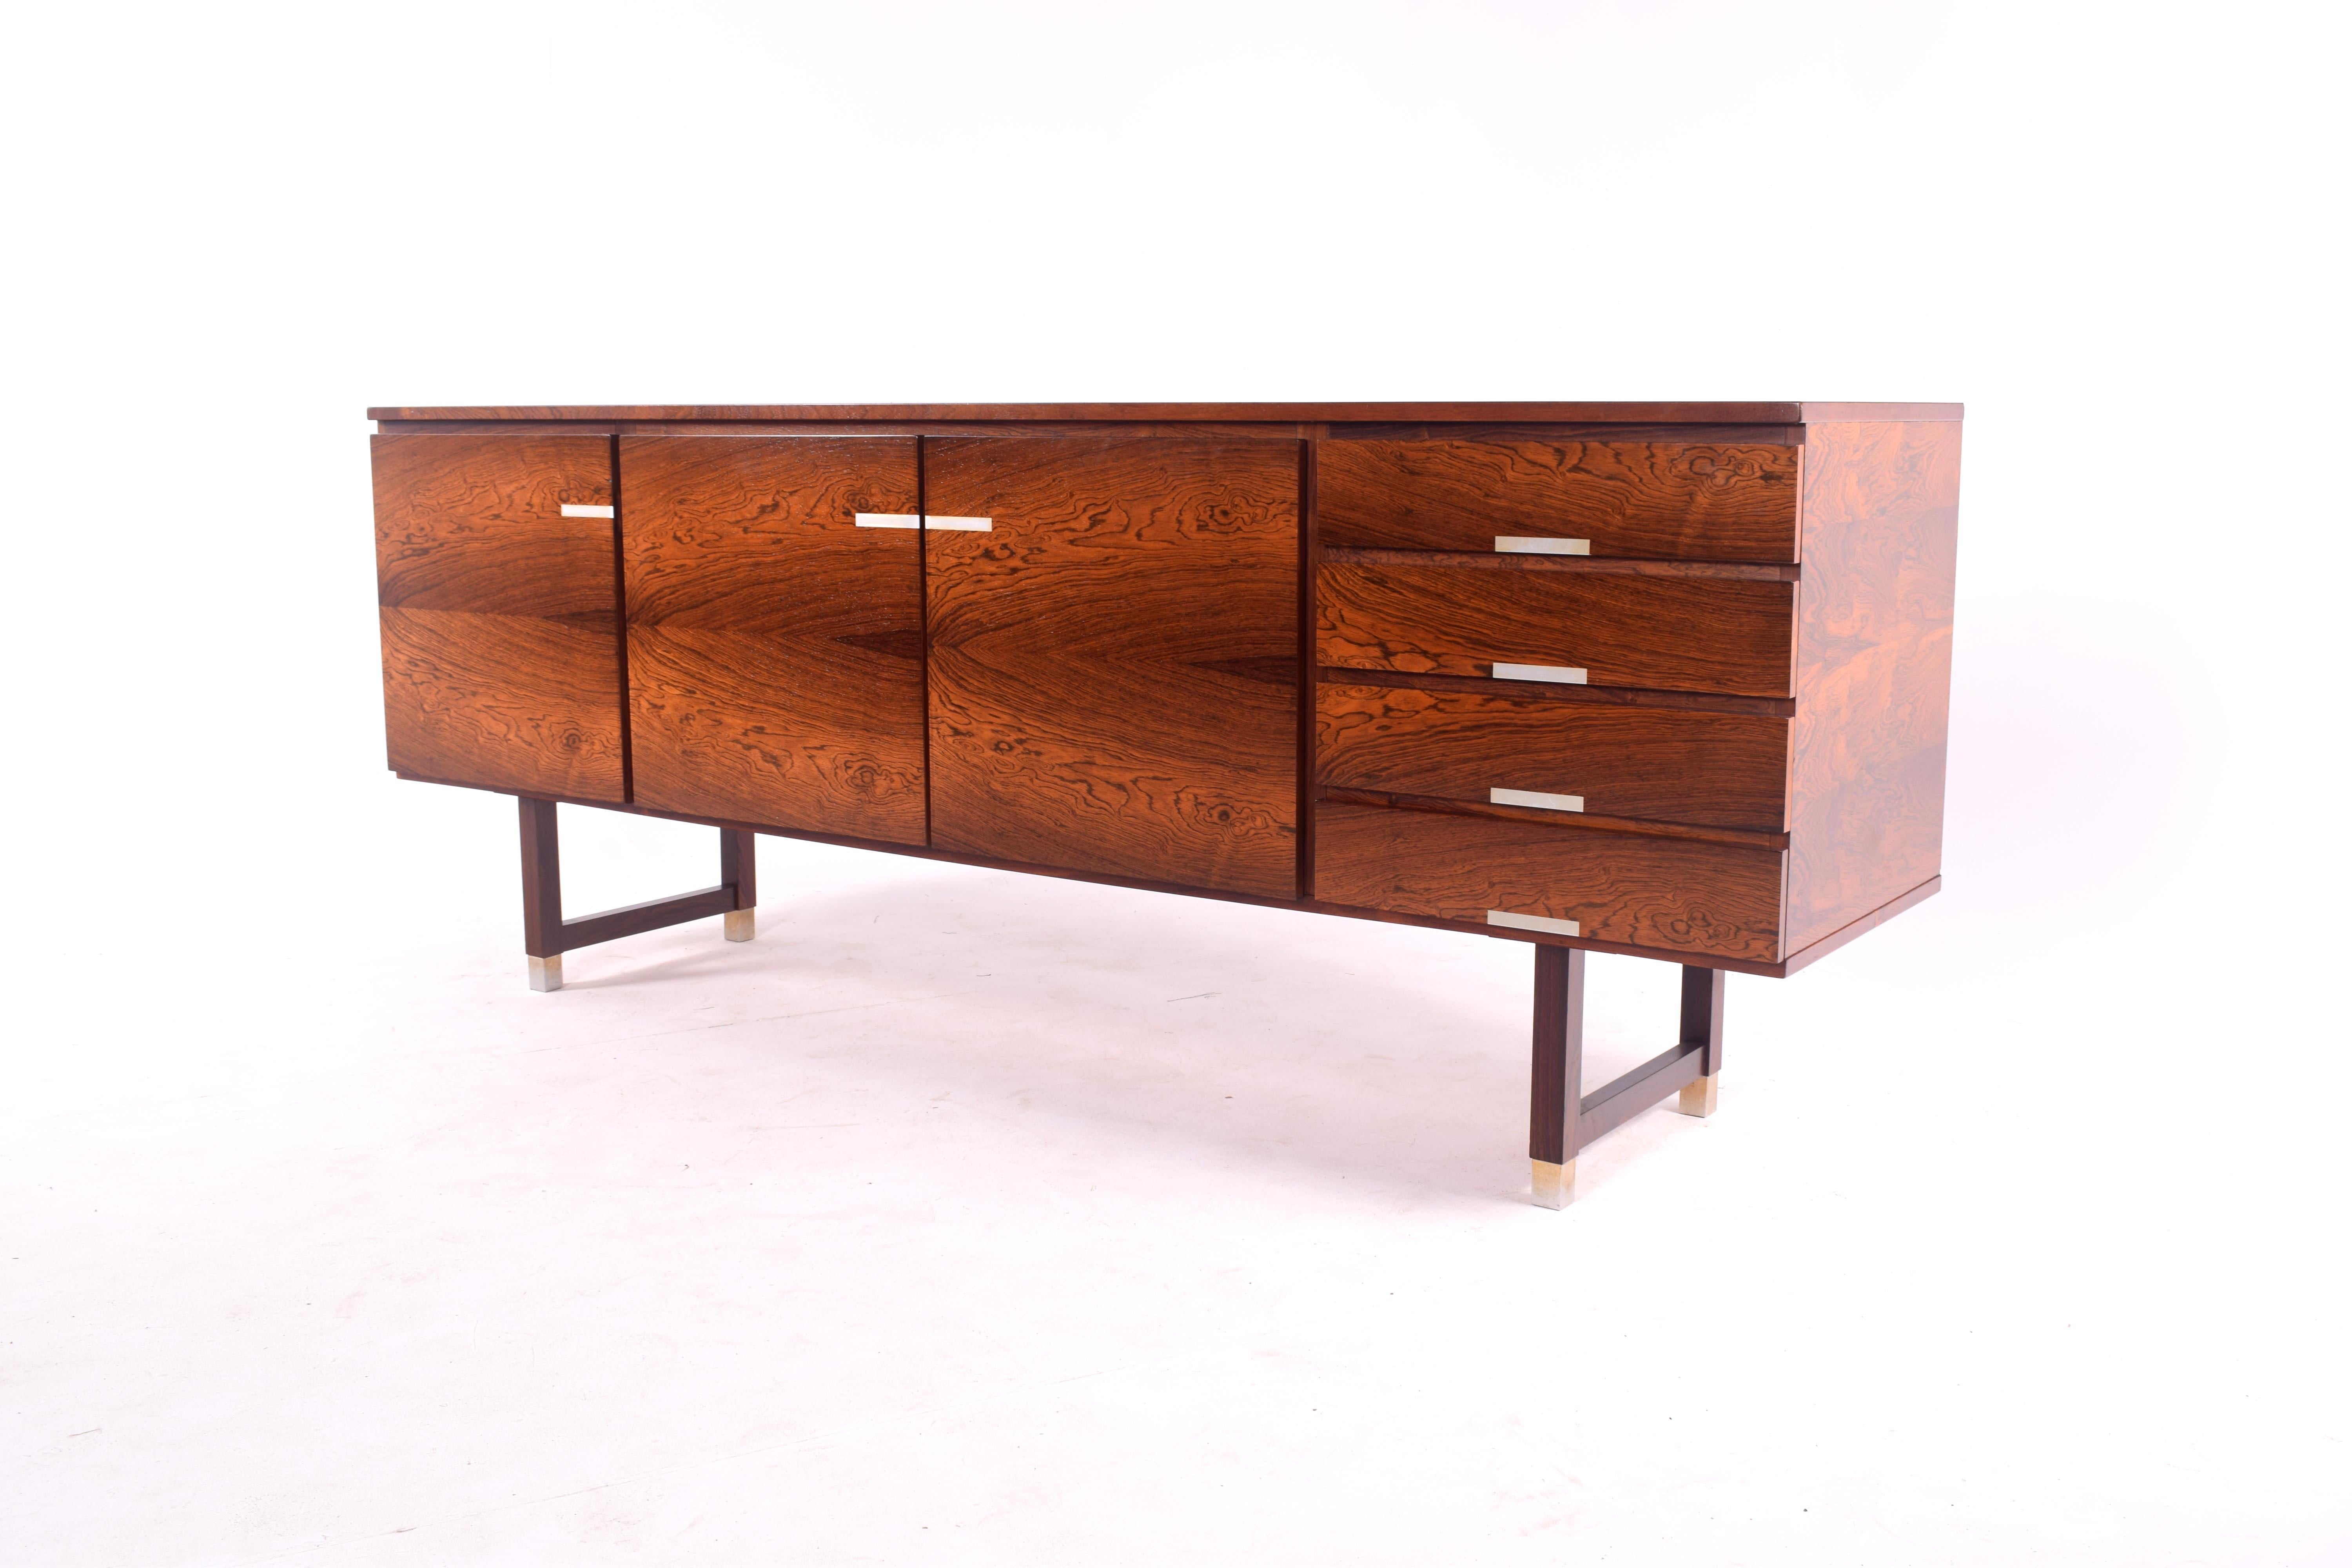 Nice rosewood sideboard. Features a horizontal book match grain on doors with contrasting aluminum inlay on handles. Raised on square legs with capped feet of aluminum.